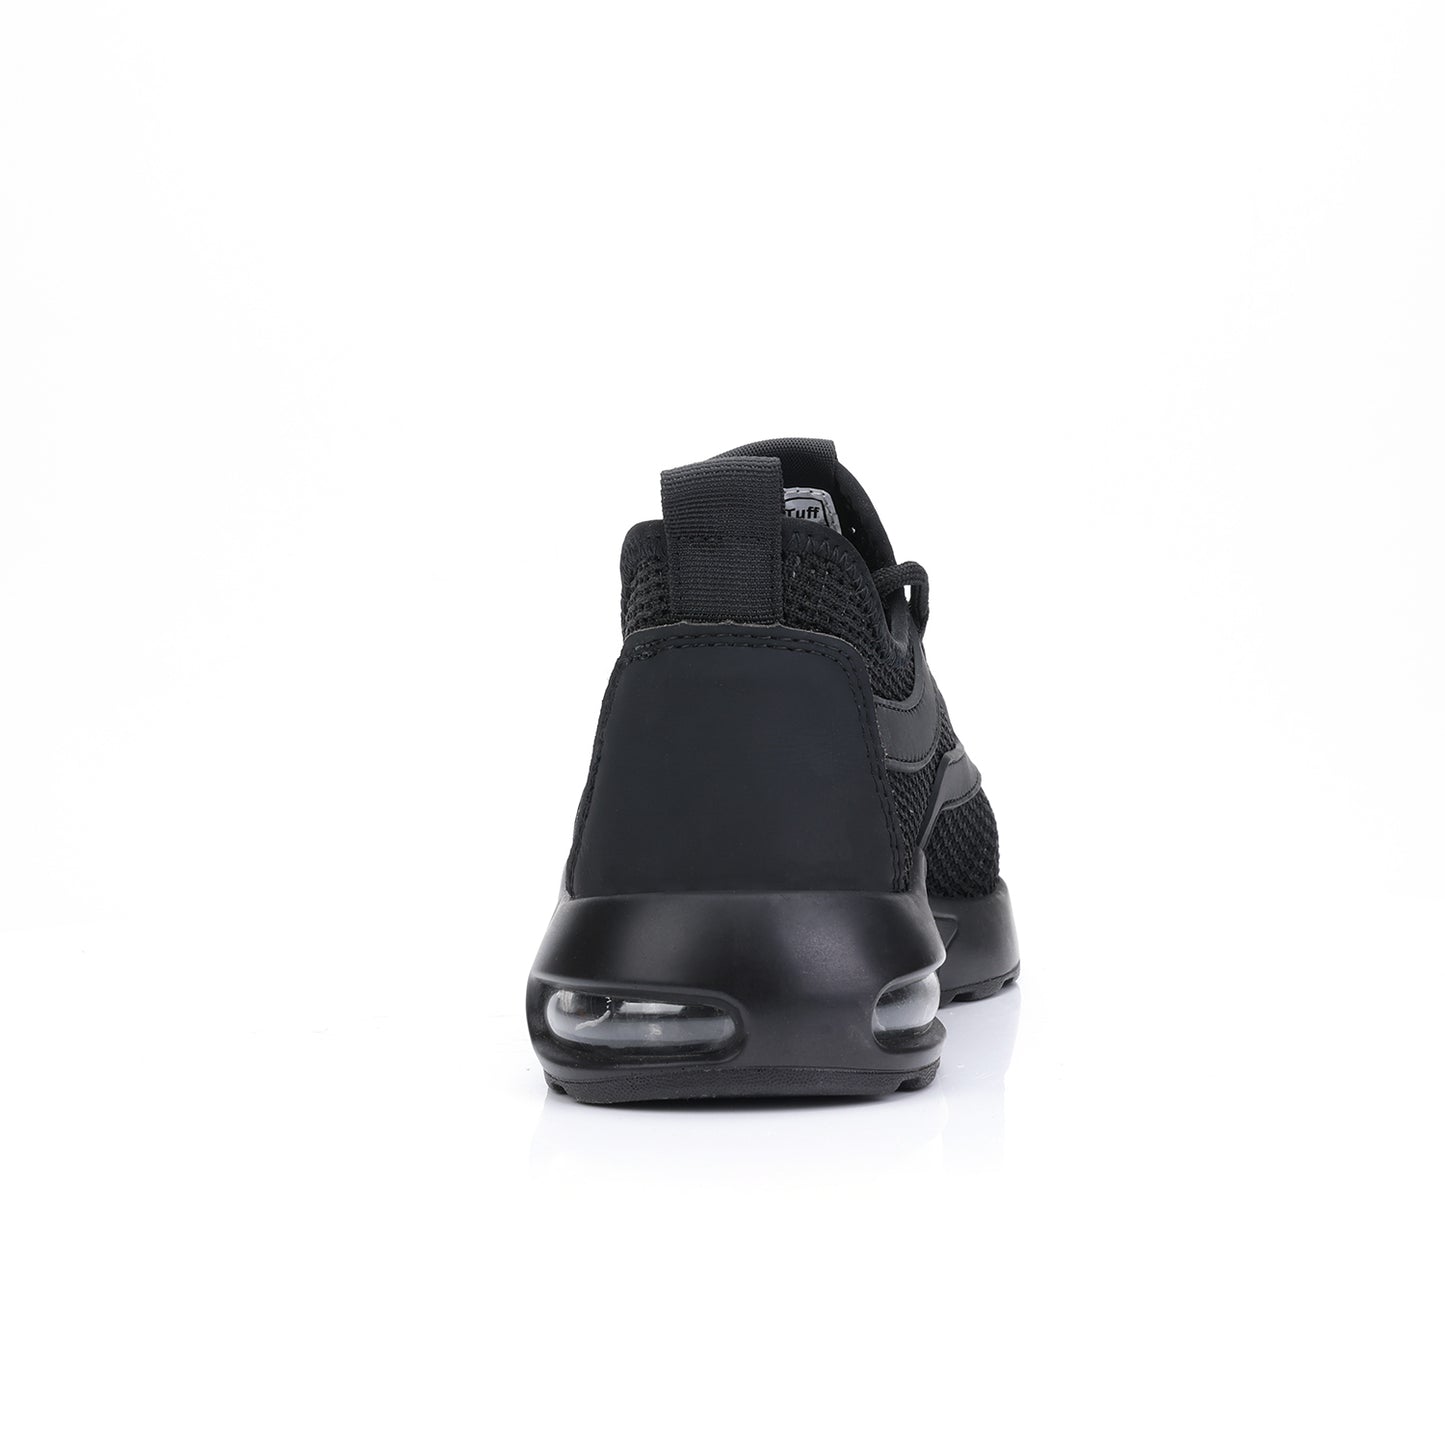 TruTuff WICK Safety Shoes (Design 4)